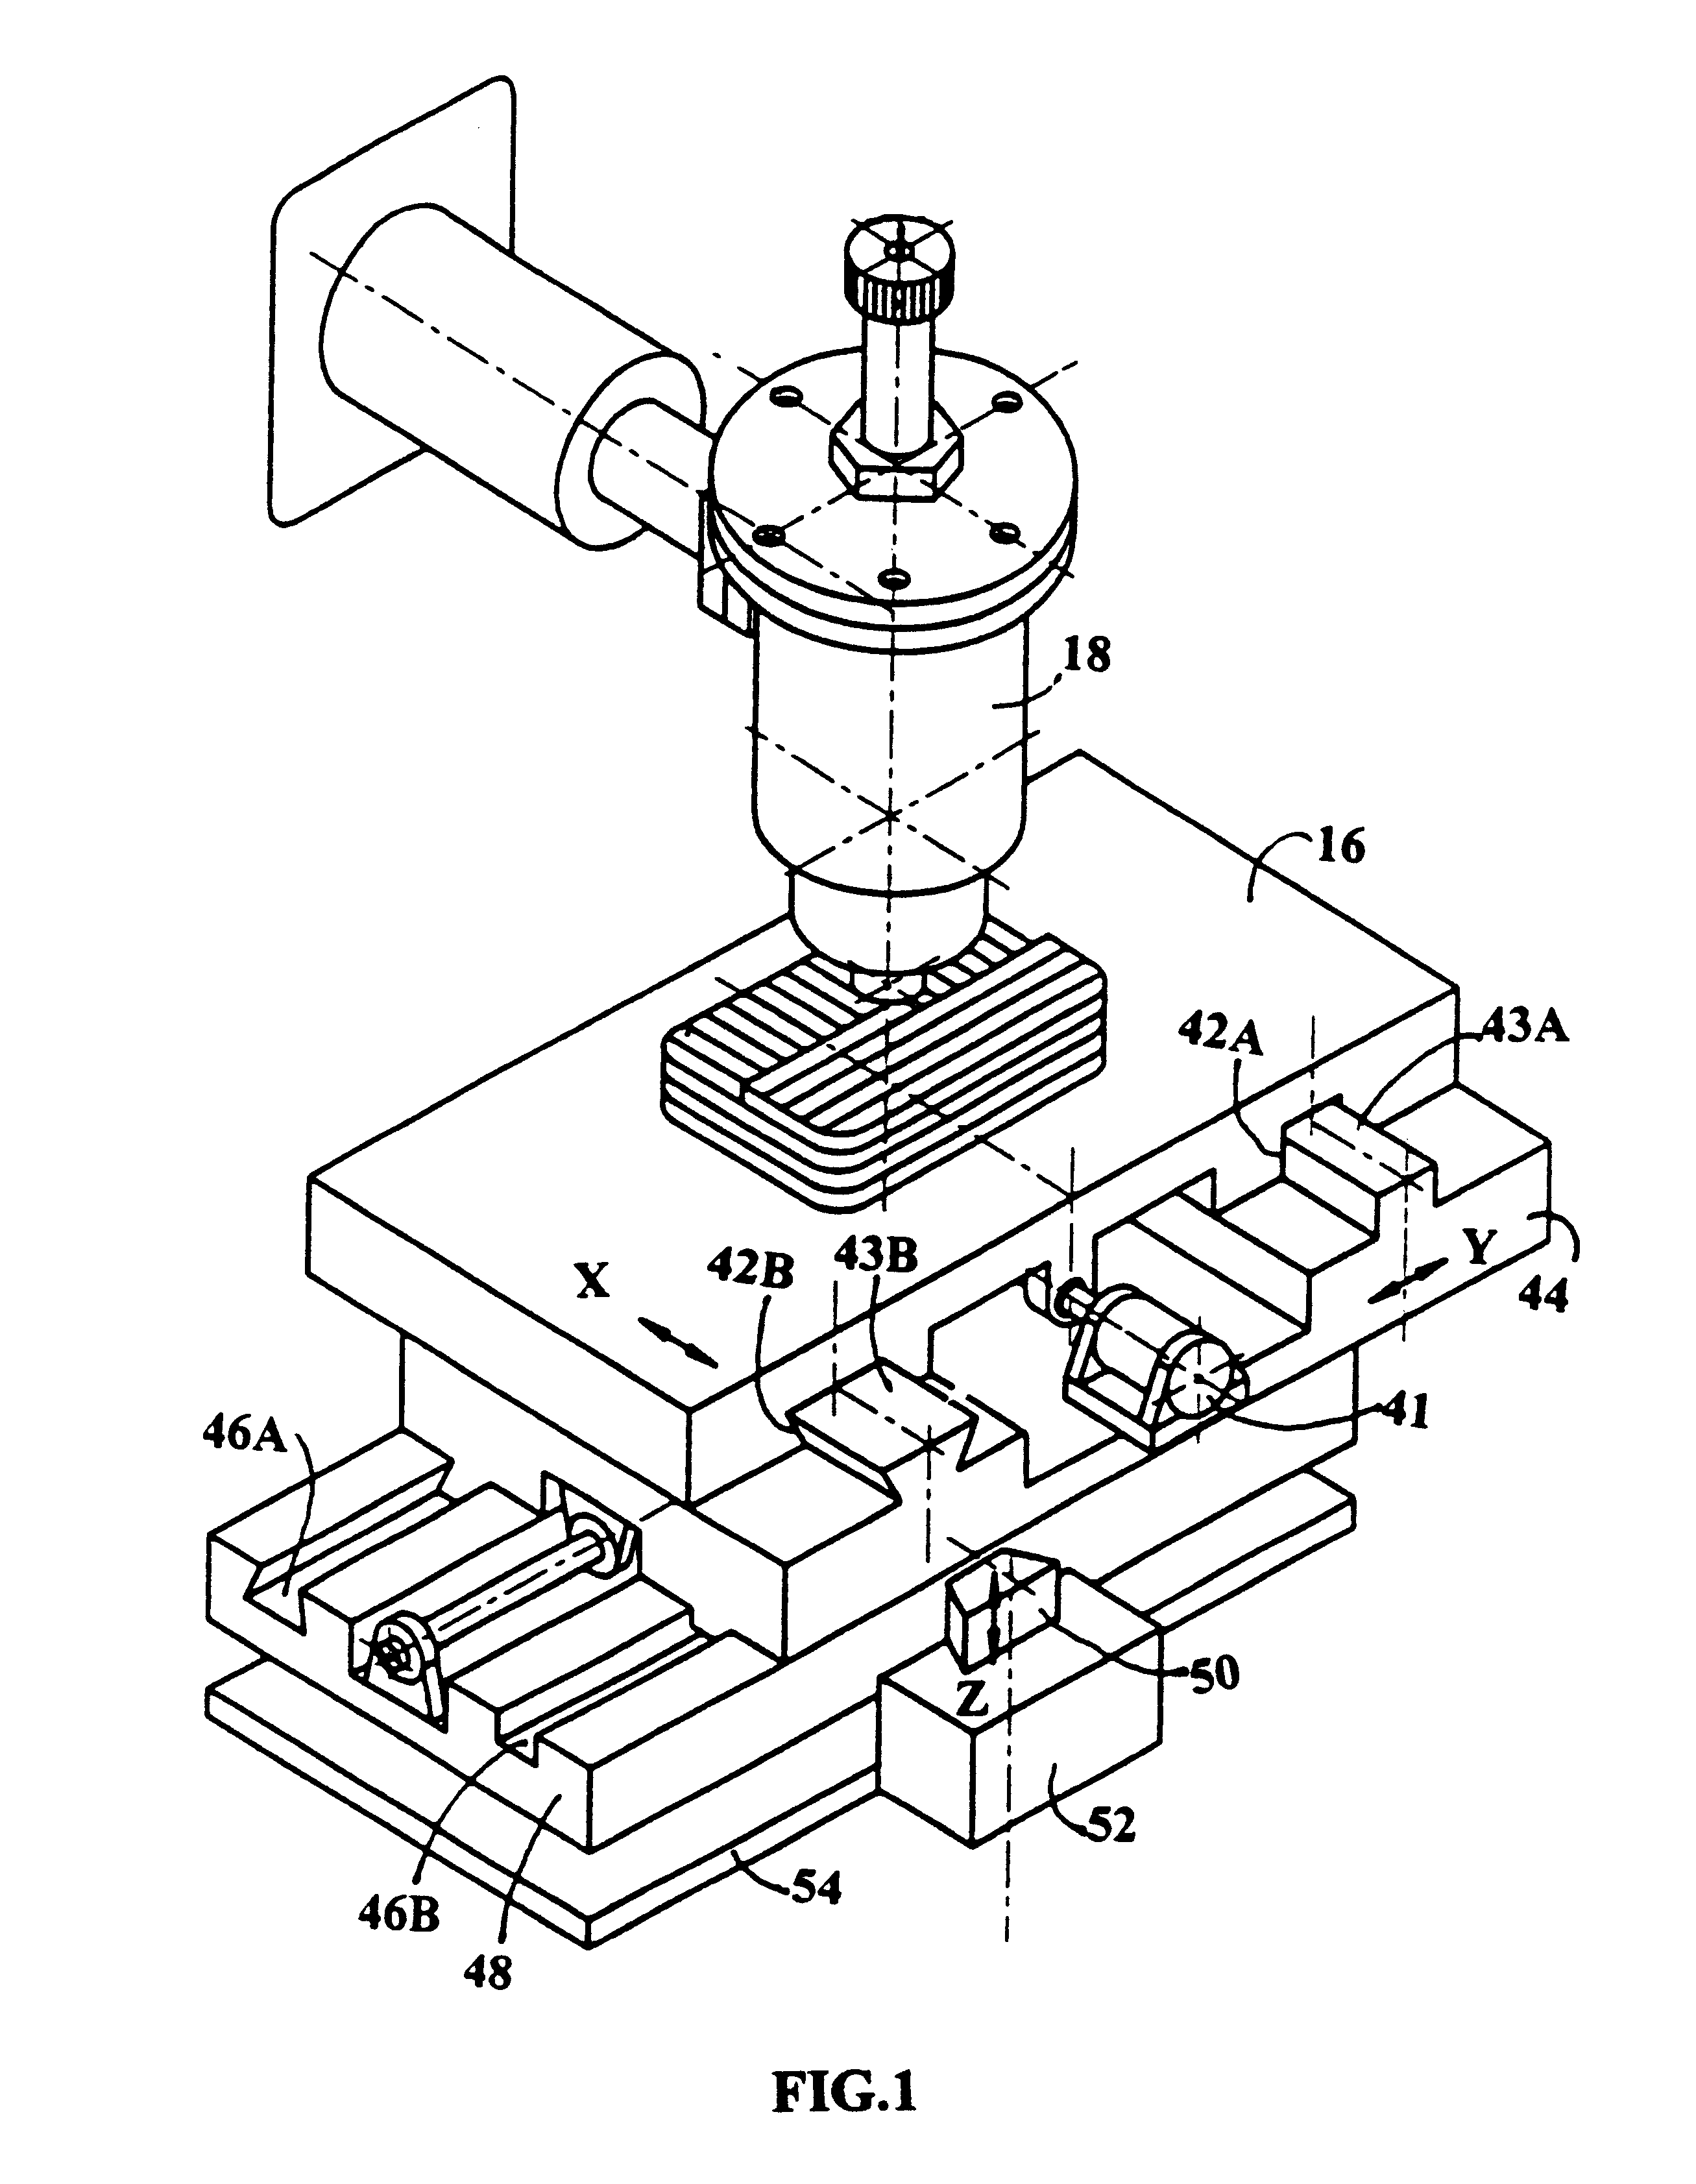 Rapid prototyping and fabrication method for 3-D food objects